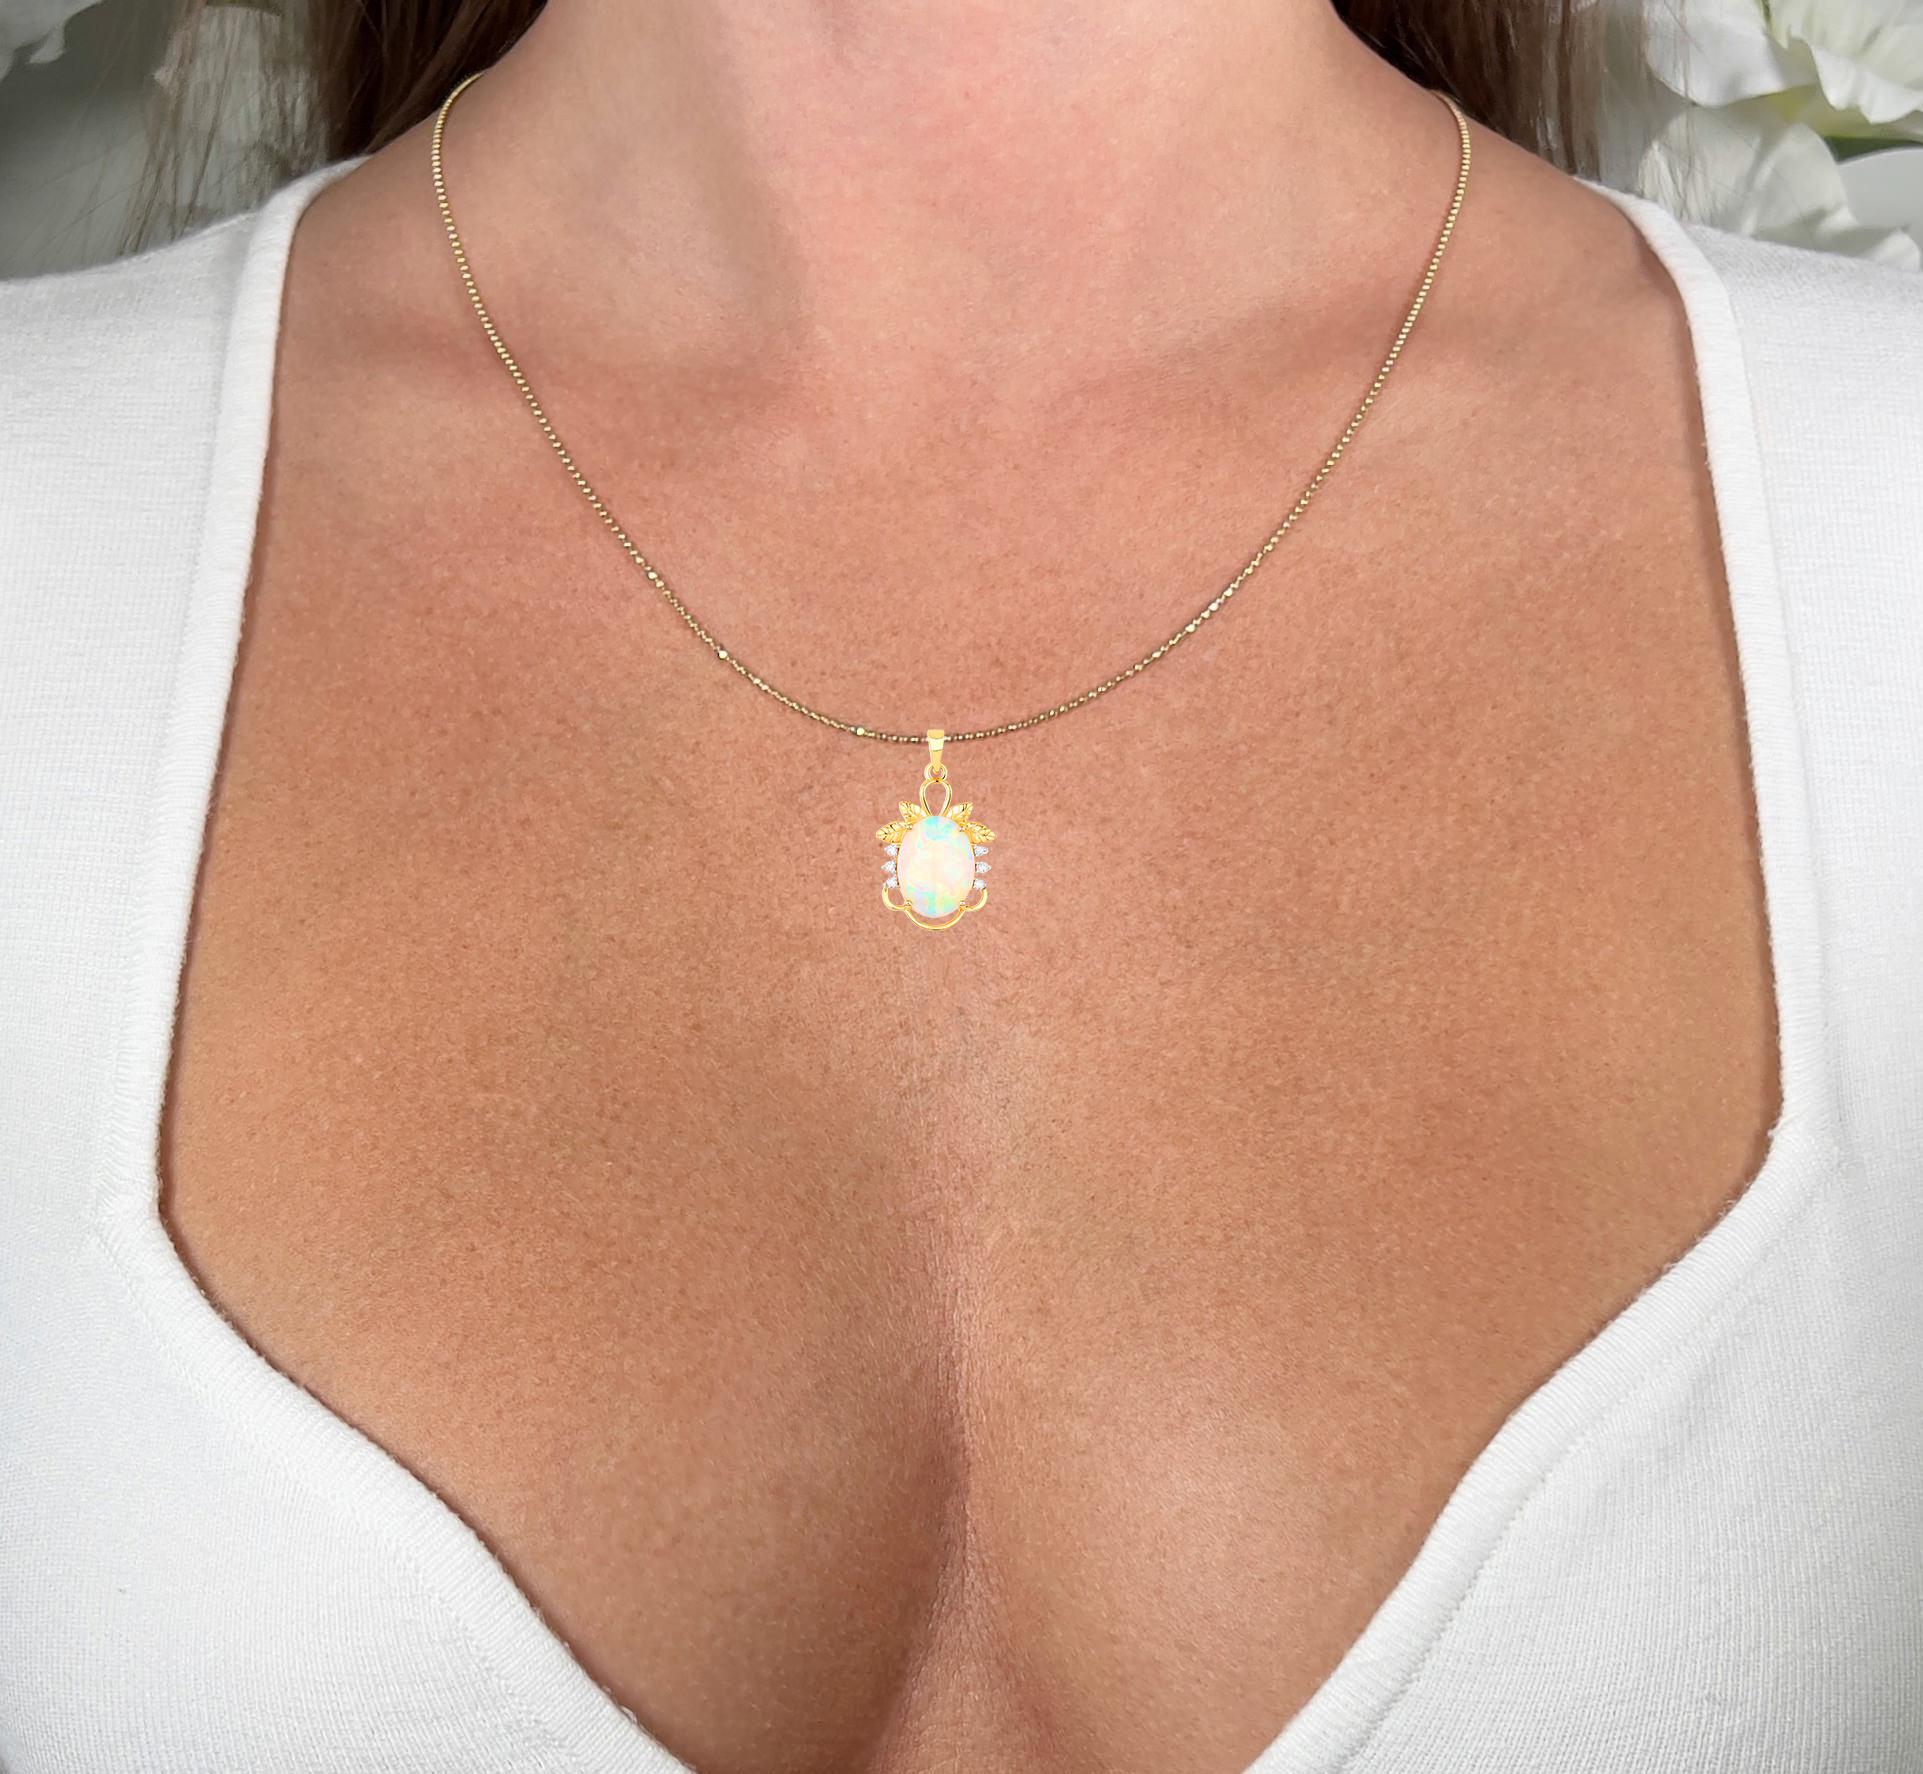 It comes with the Gemological Appraisal by GIA GG/AJP
All Gemstones are Natural
Ethiopian Opal = 3.50 Carats
6 Diamonds = 0.09 Carats
Metal: 14K Yellow Gold
Pendant Dimensions: 28 x 17 mm